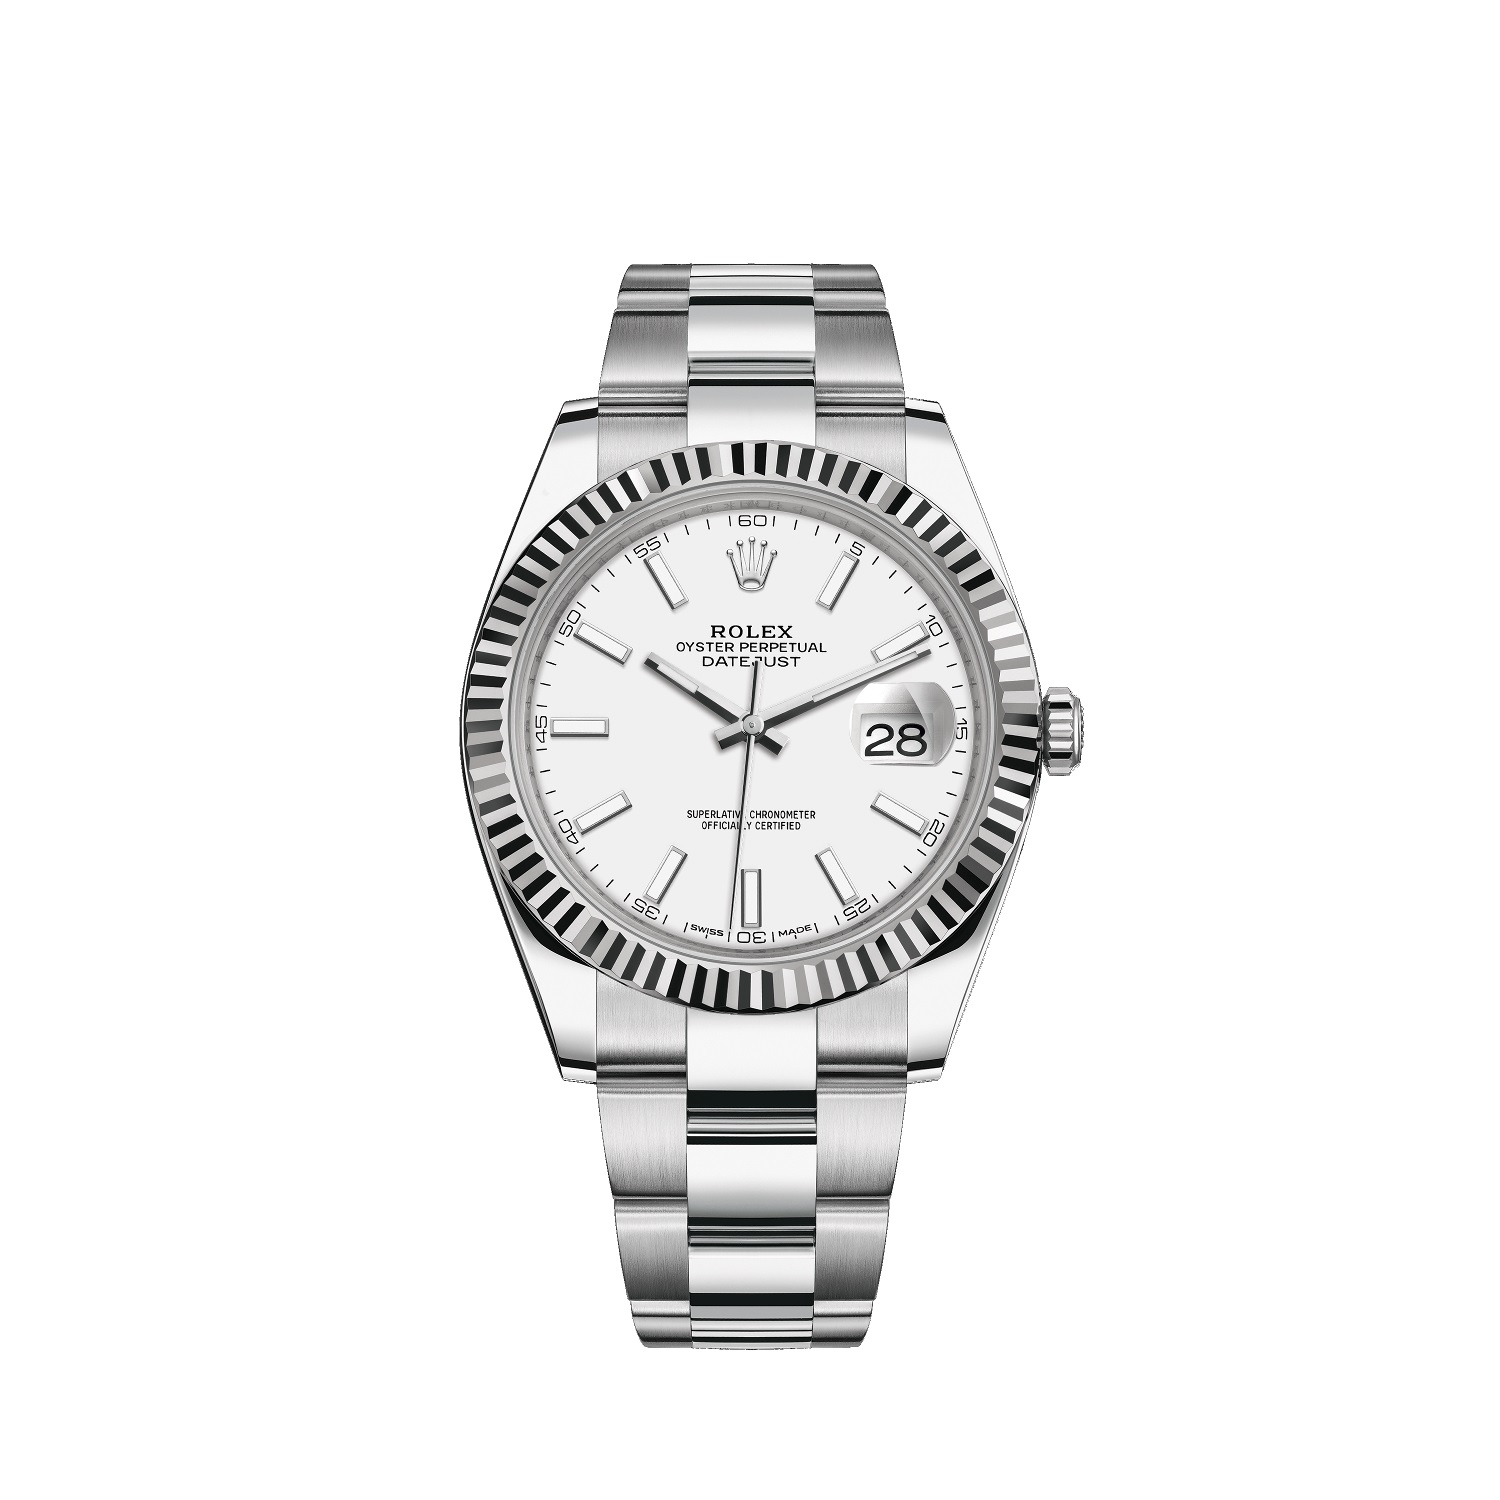 Datejust 41 126334 White Gold & Stainless Steel Watch (White)